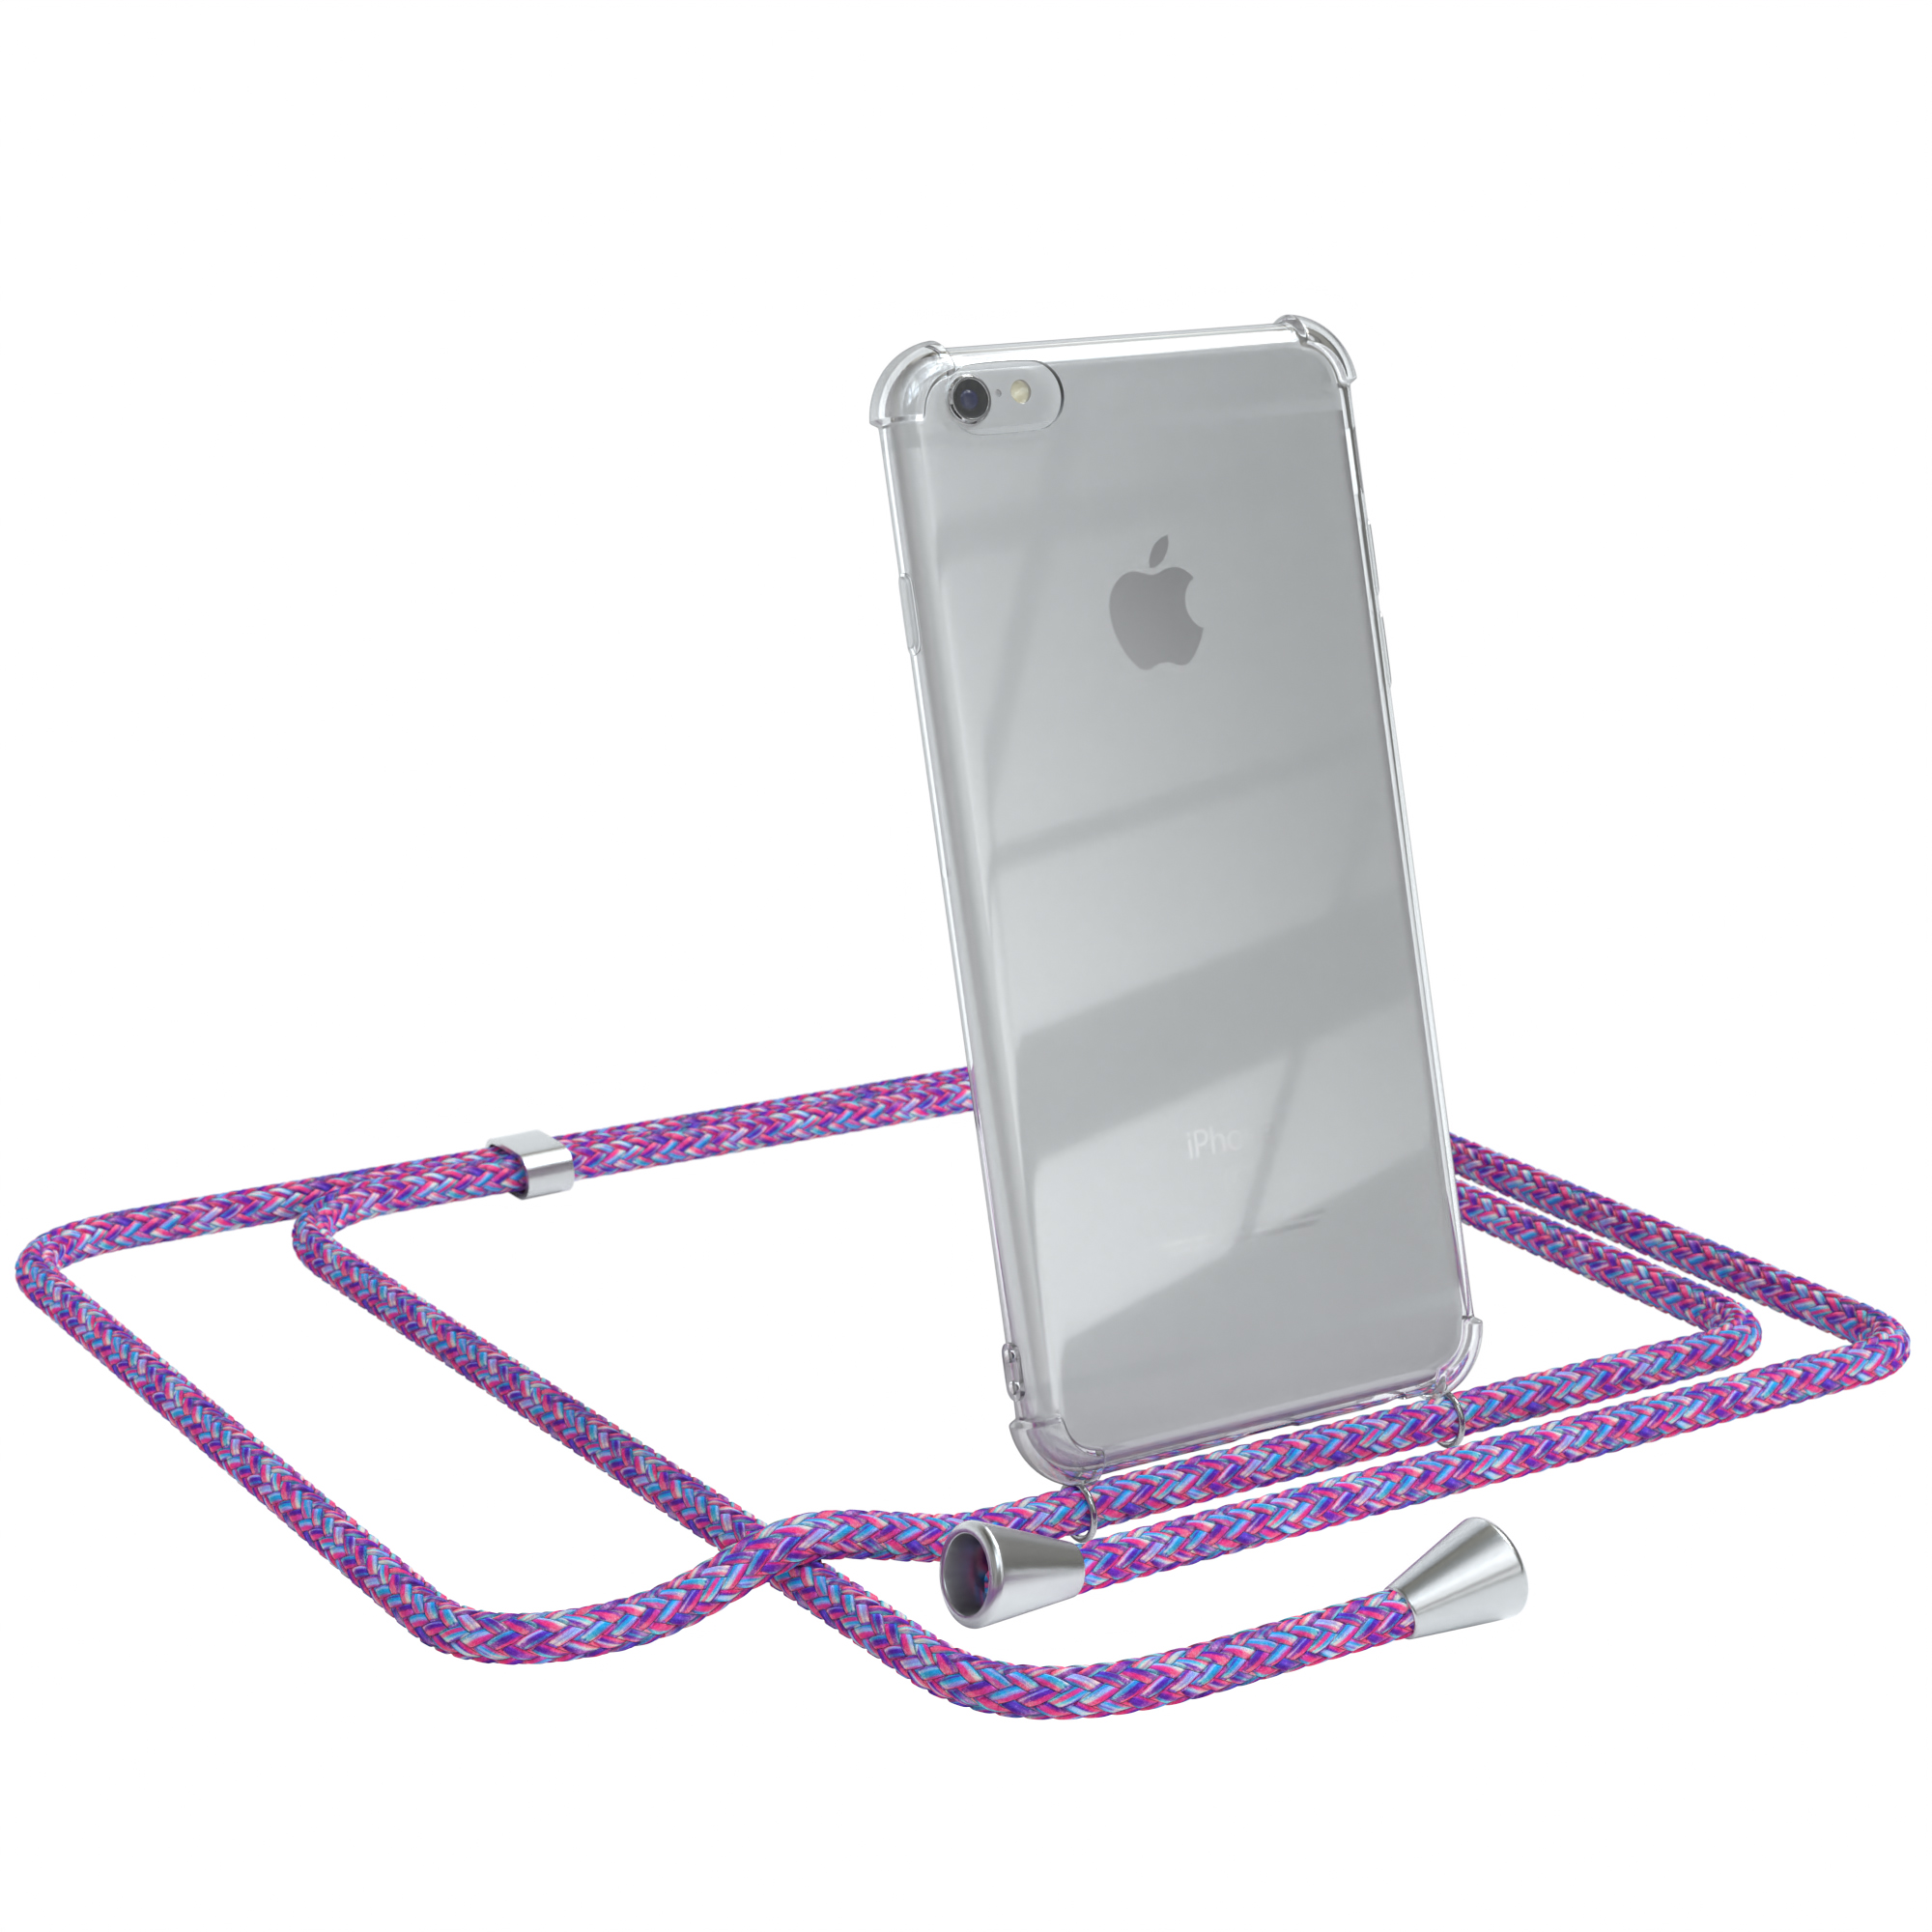 Clear mit Umhängetasche, CASE 6 Lila / Apple, Silber Umhängeband, Cover 6S, Clips EAZY / iPhone